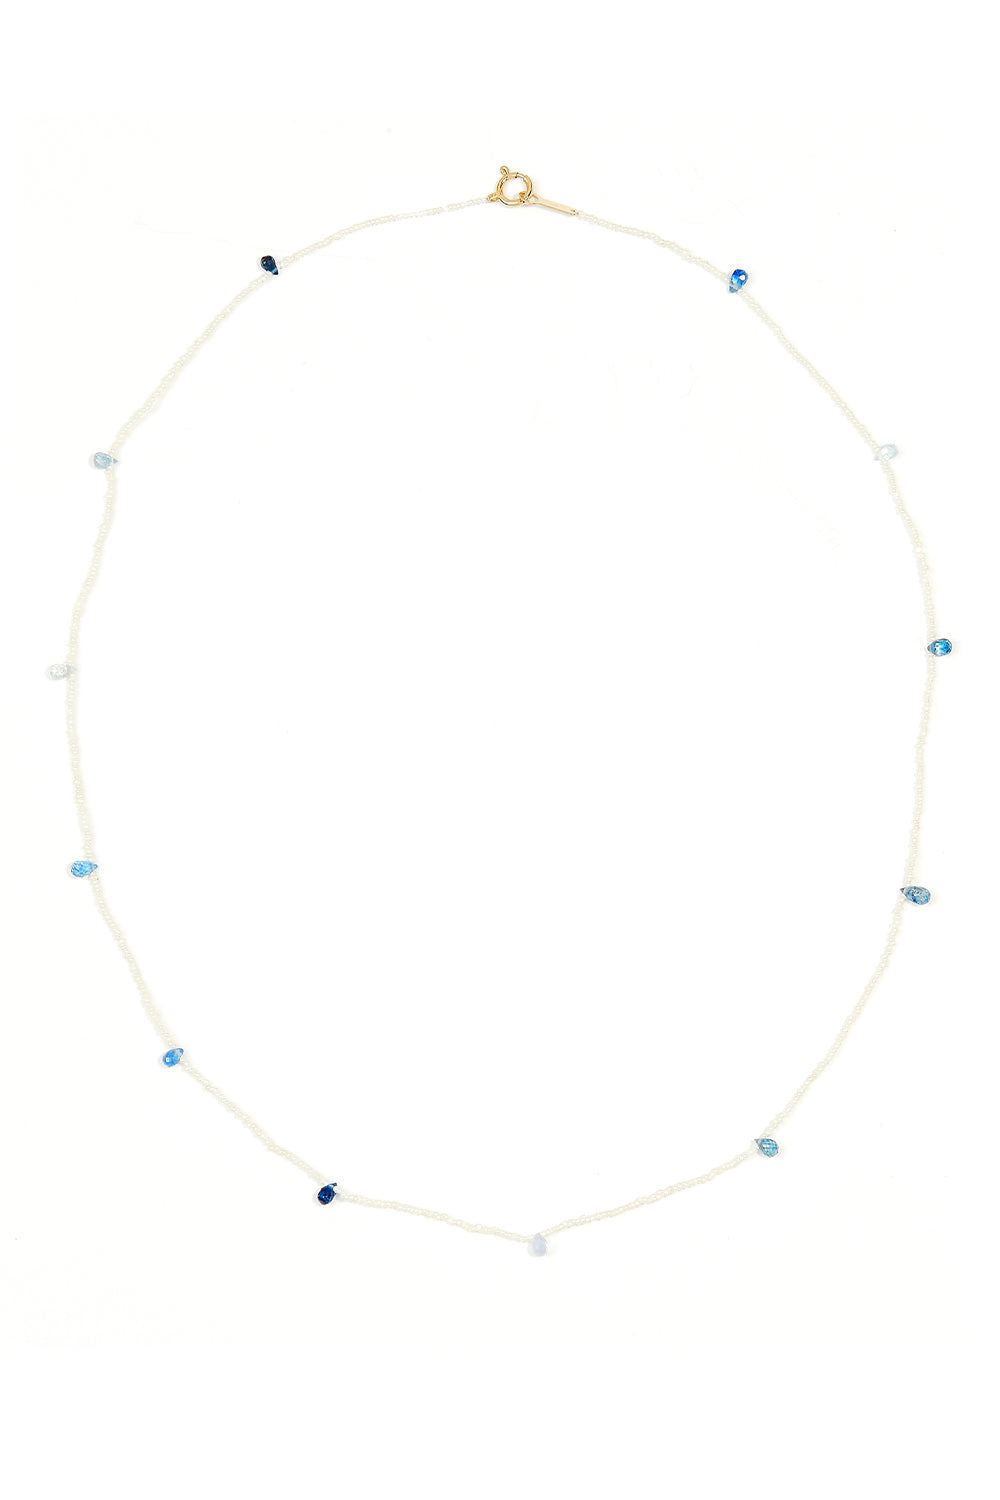 L.A. STEIN Sapphire and Keshi Pearl Beaded Necklace